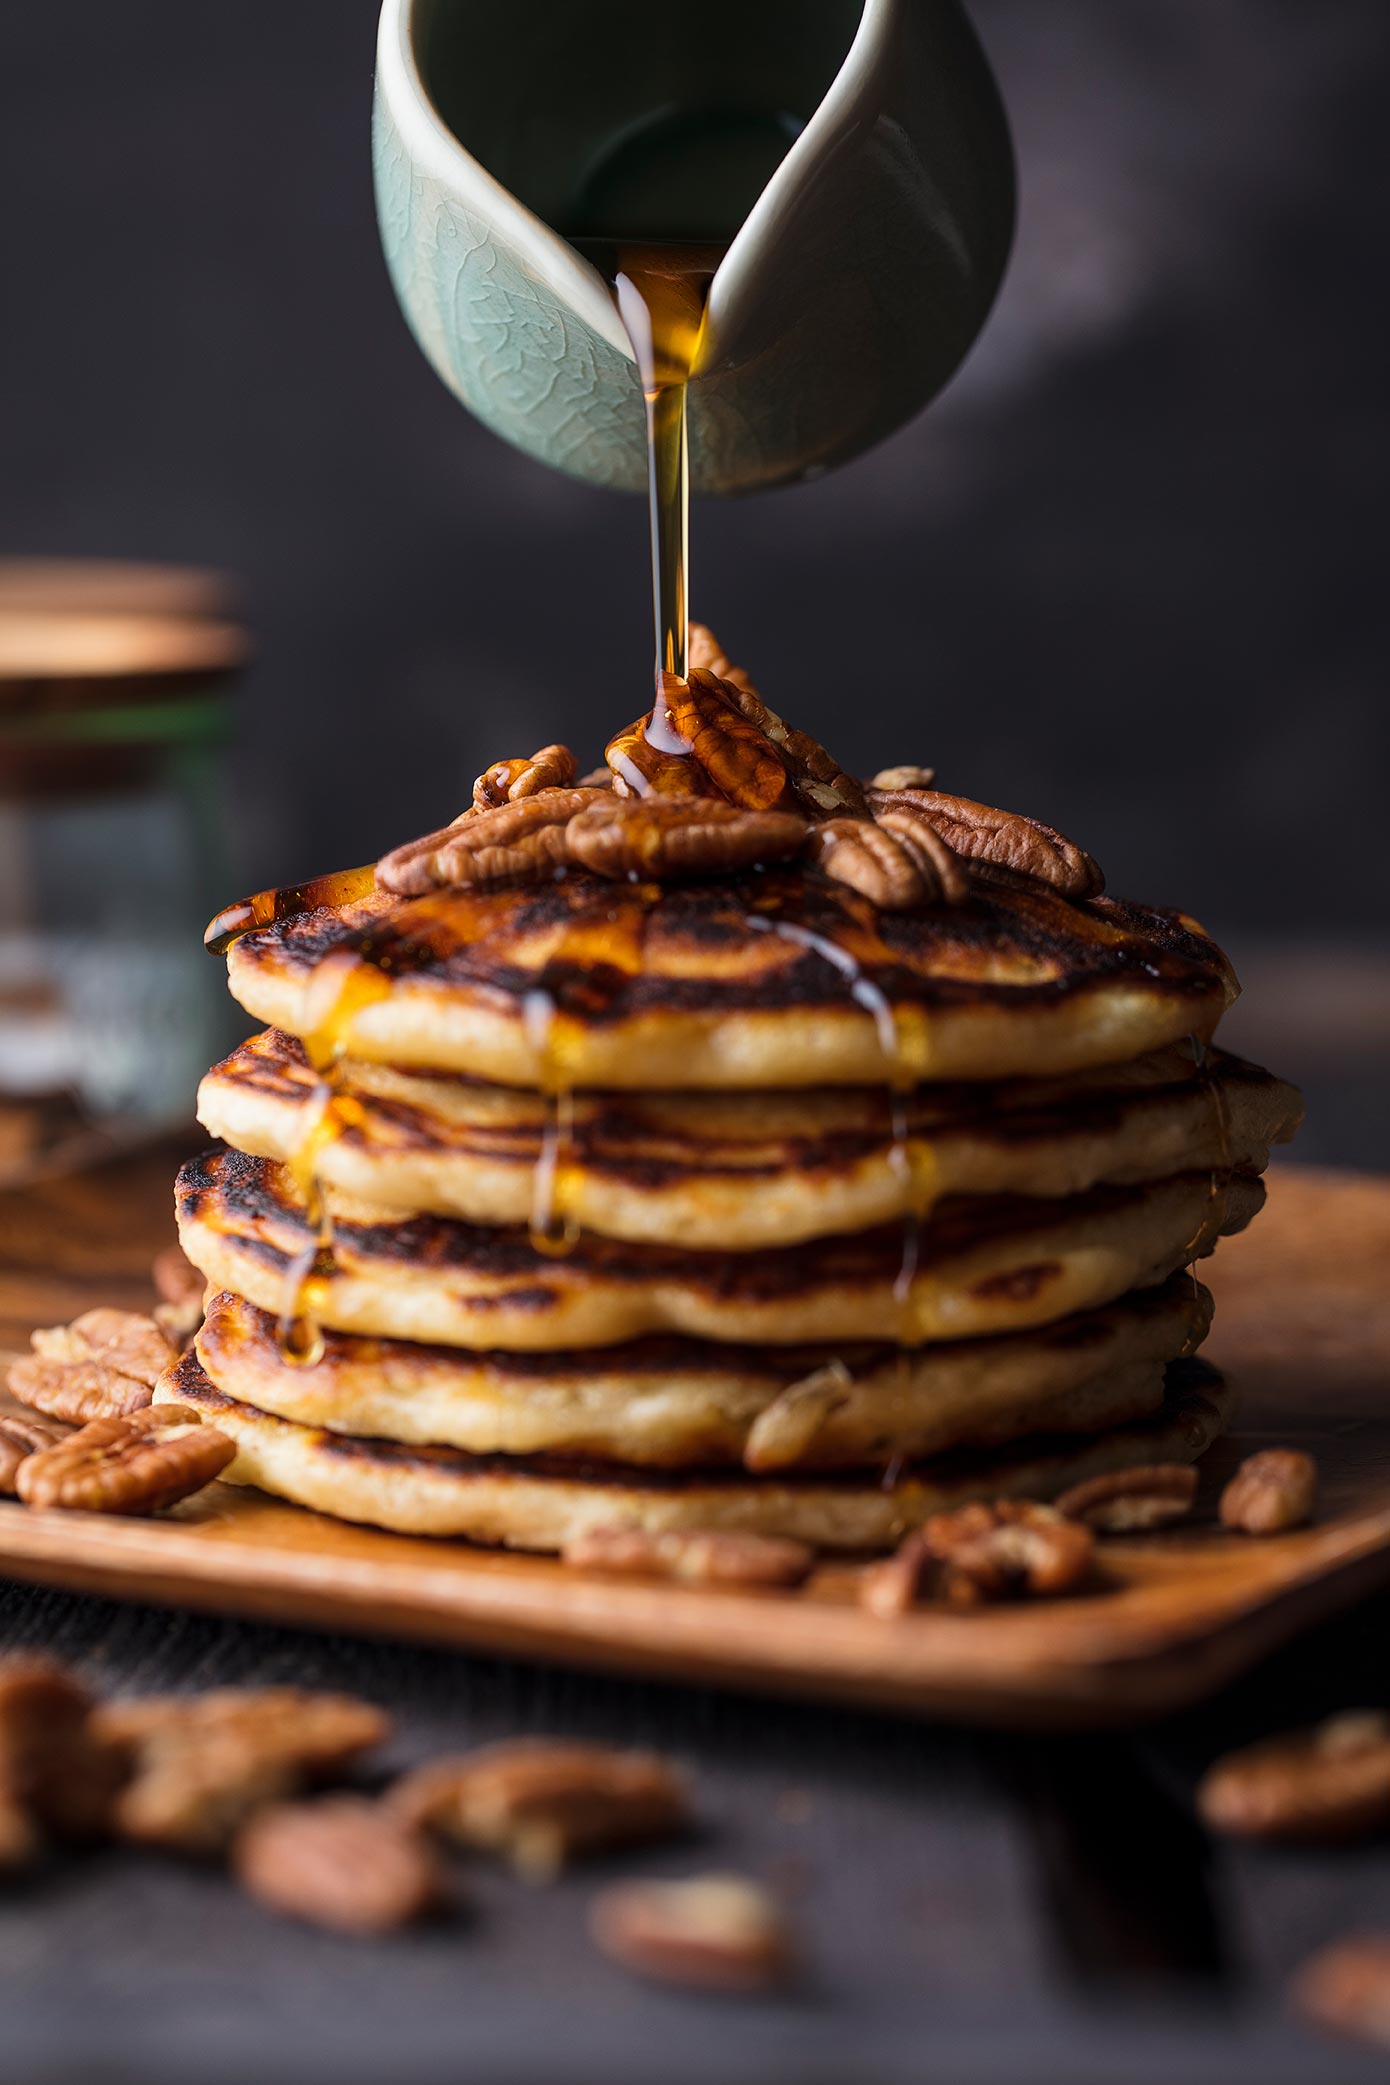 Walnut Pancakes Canon 100mm f2.8L IS Macro the best lens for food photography